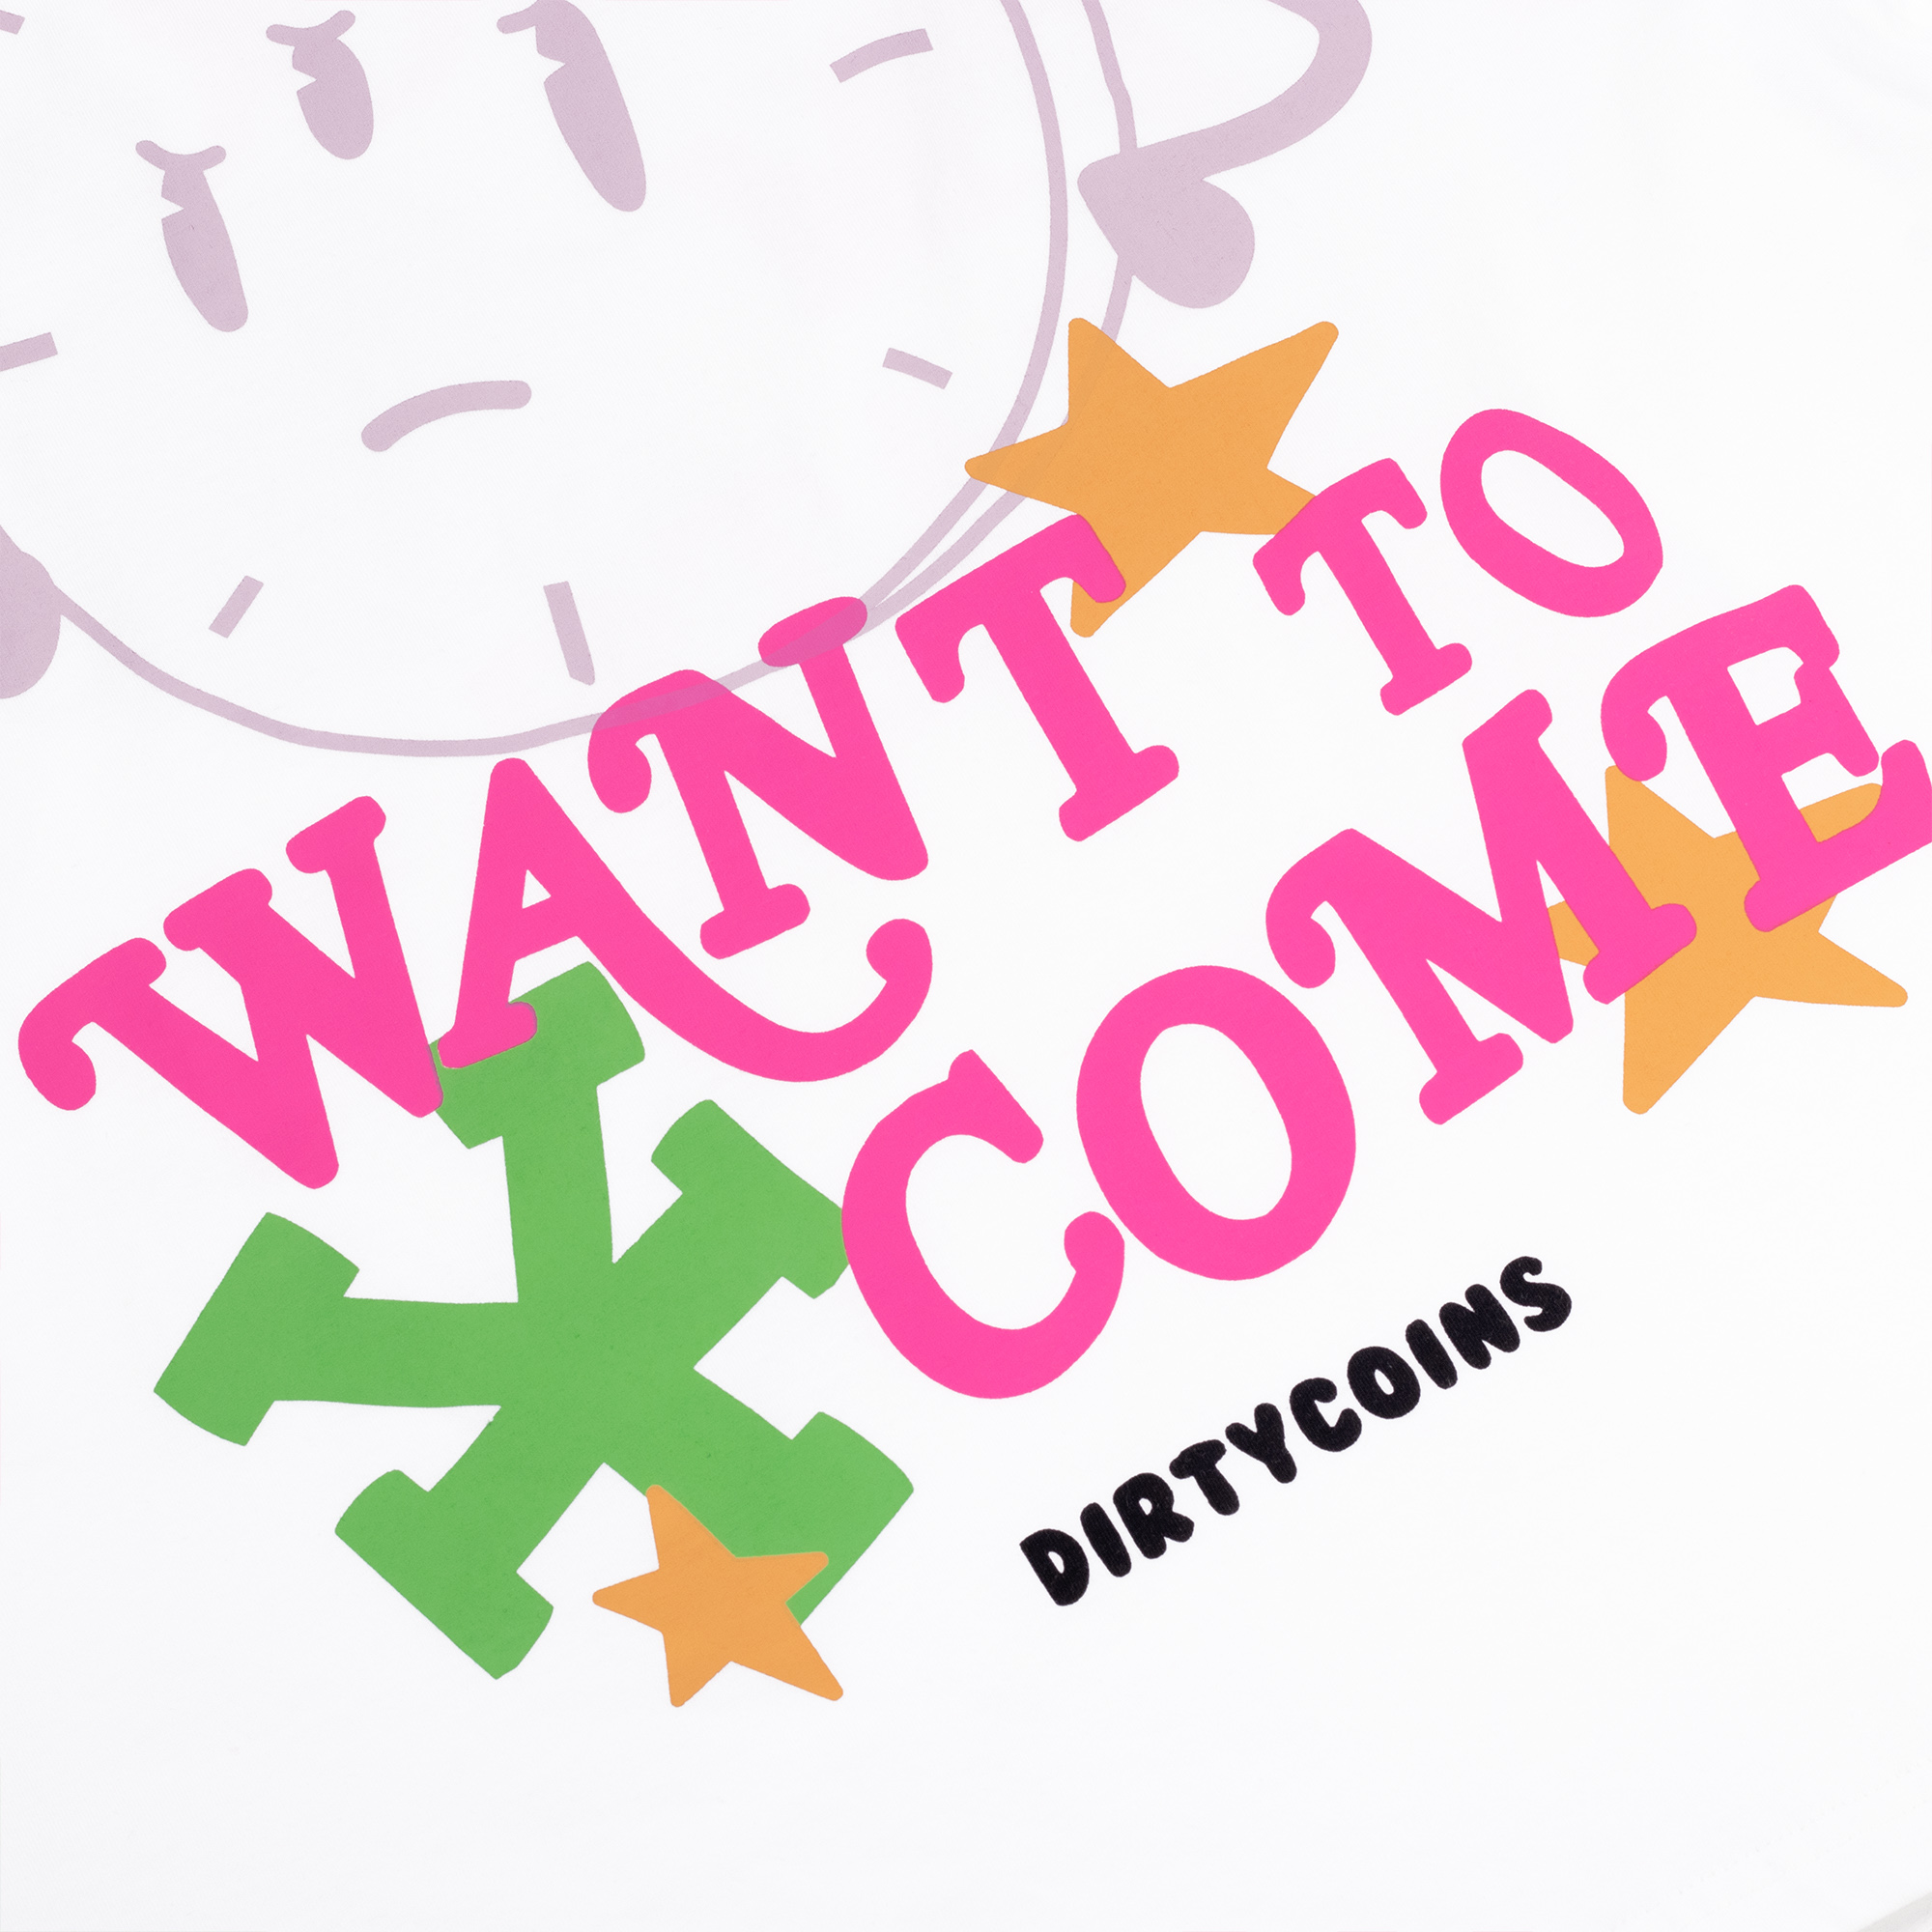 DirtyCoins Don’t Waste My Time T-shirt - White